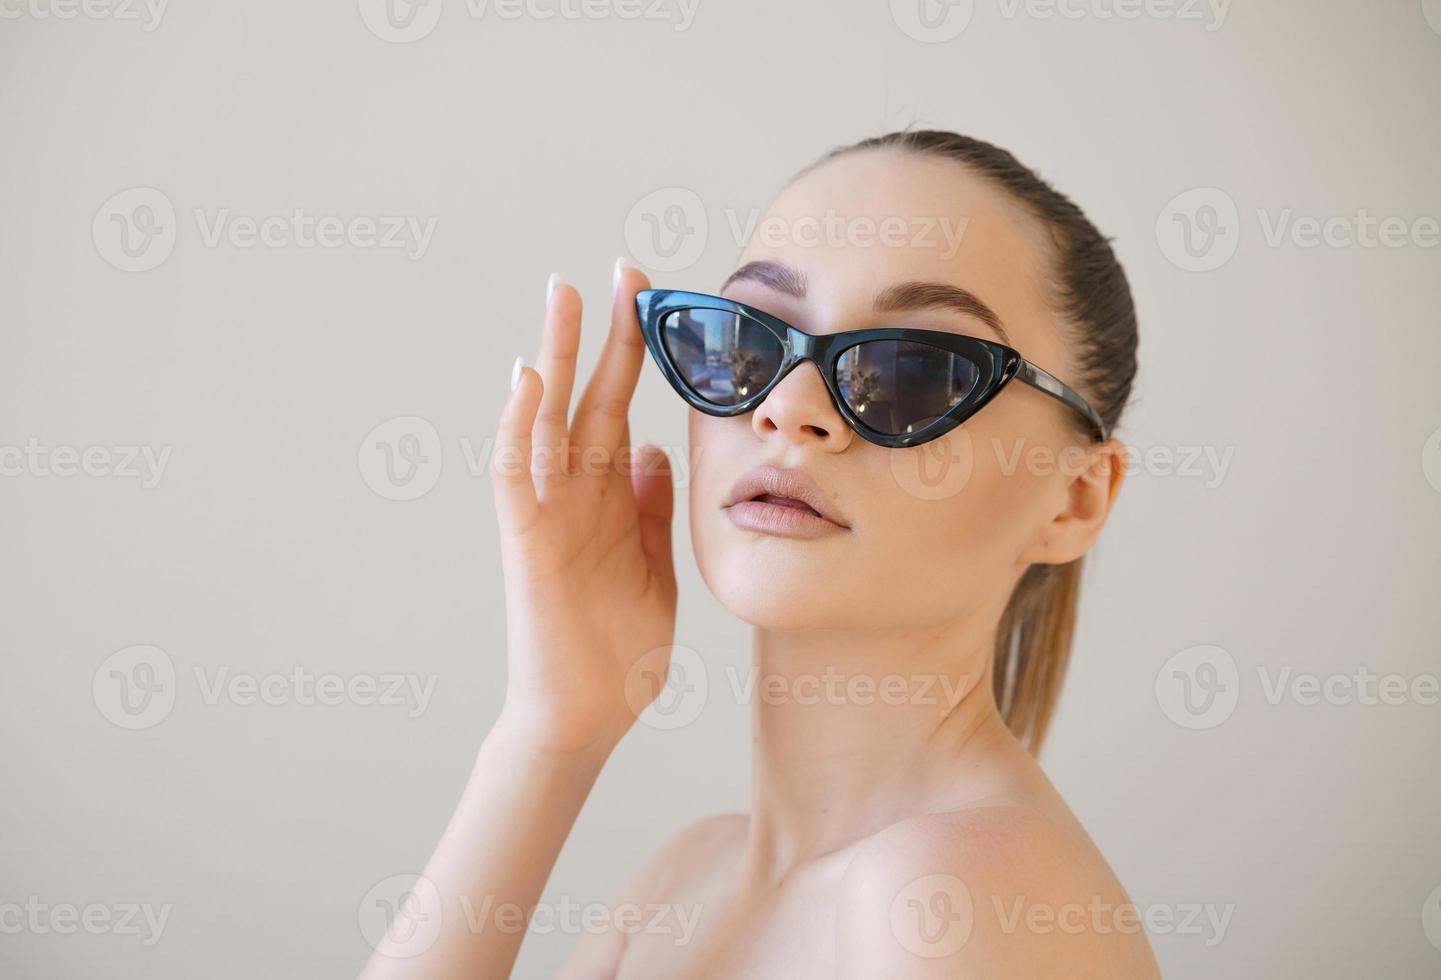 Beauty fashion model girl with brown hair wearing stylish sunglasses touches photo